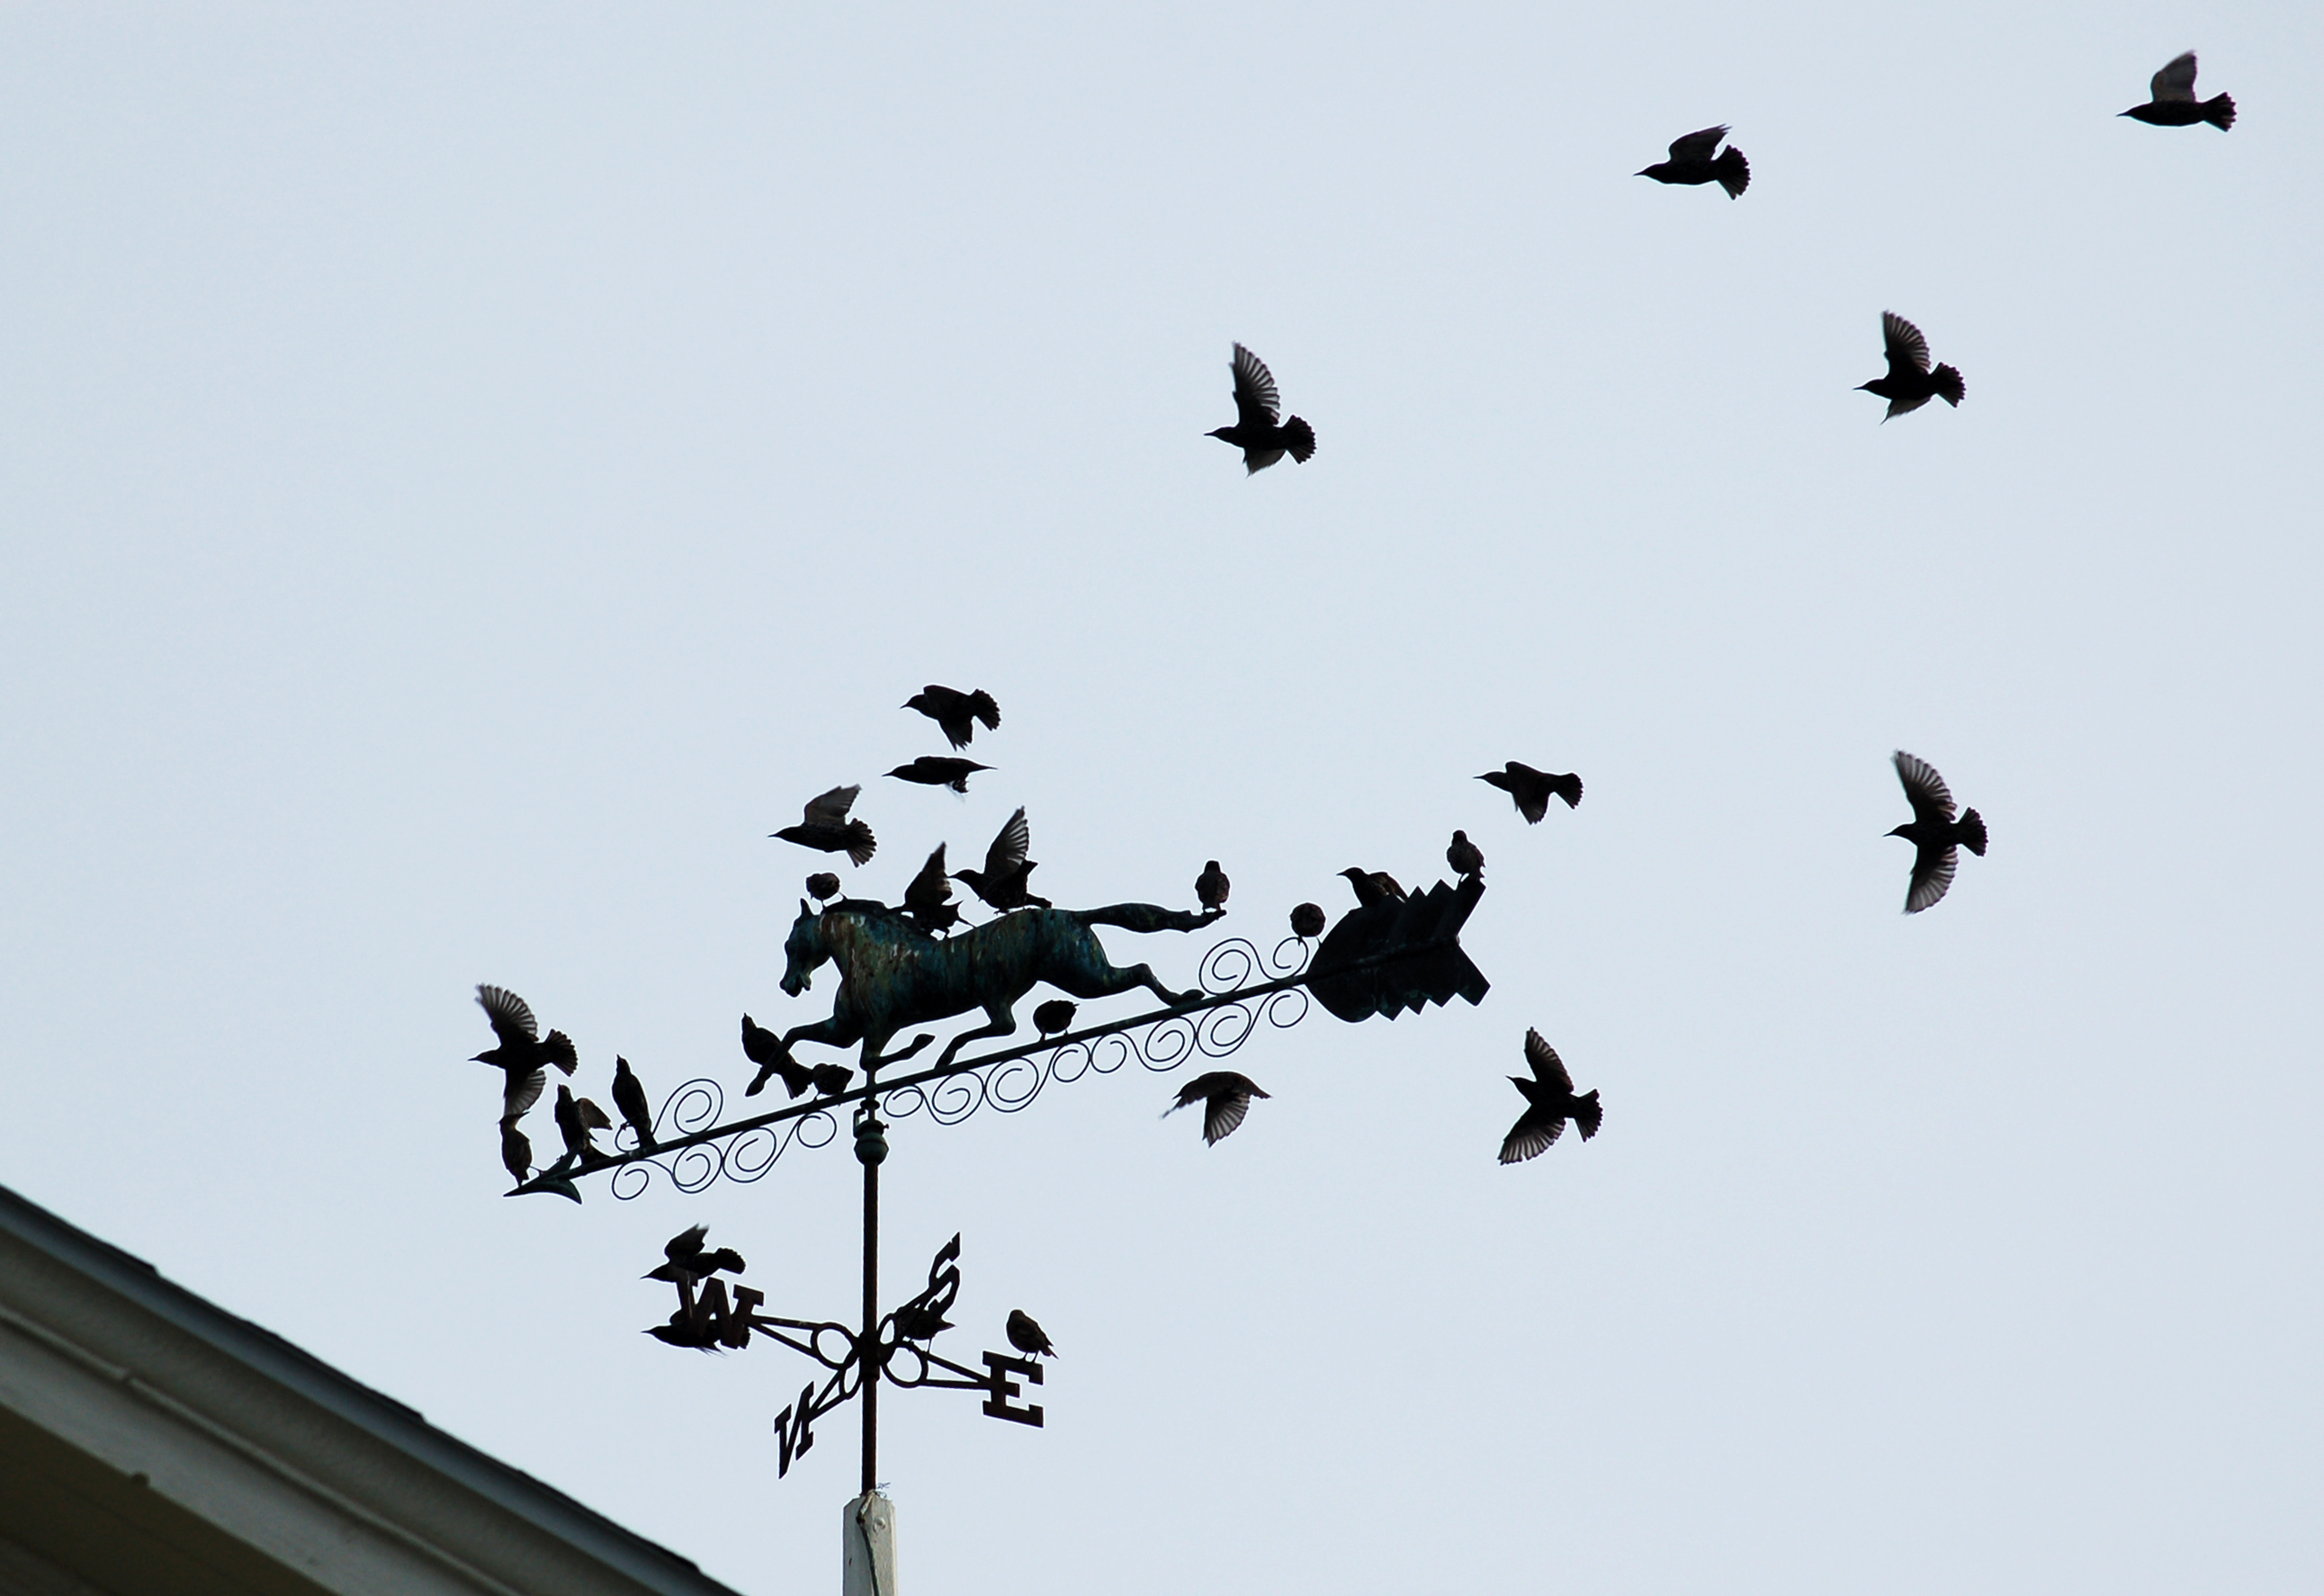 Birds (starlings) in flight and perched on a weathervane featuring a horse.